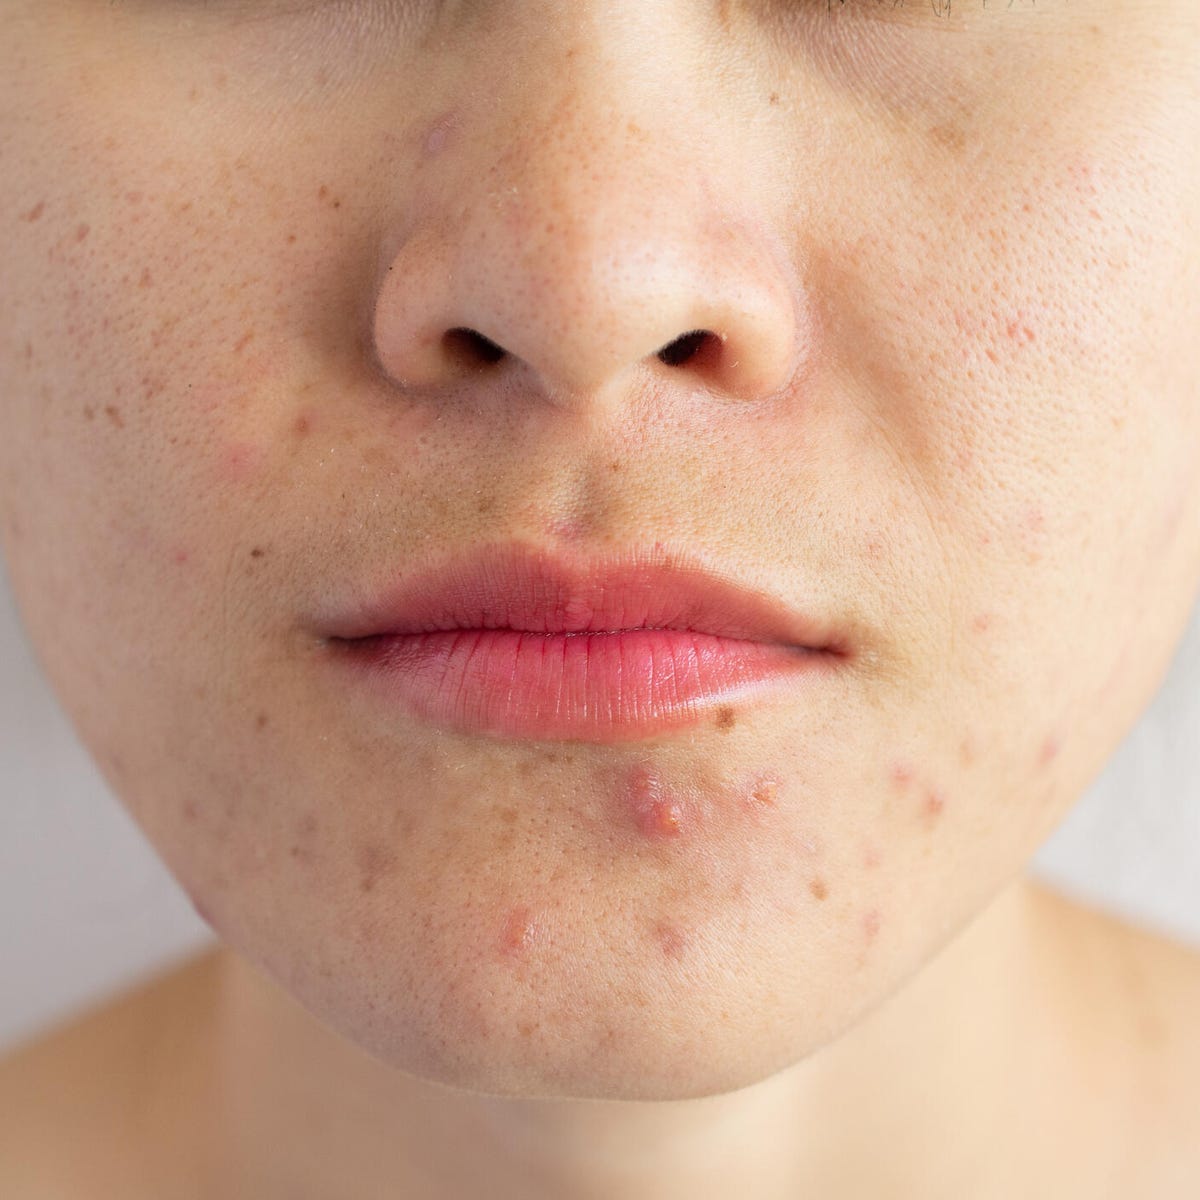 What is the #1 way to get rid of acne?